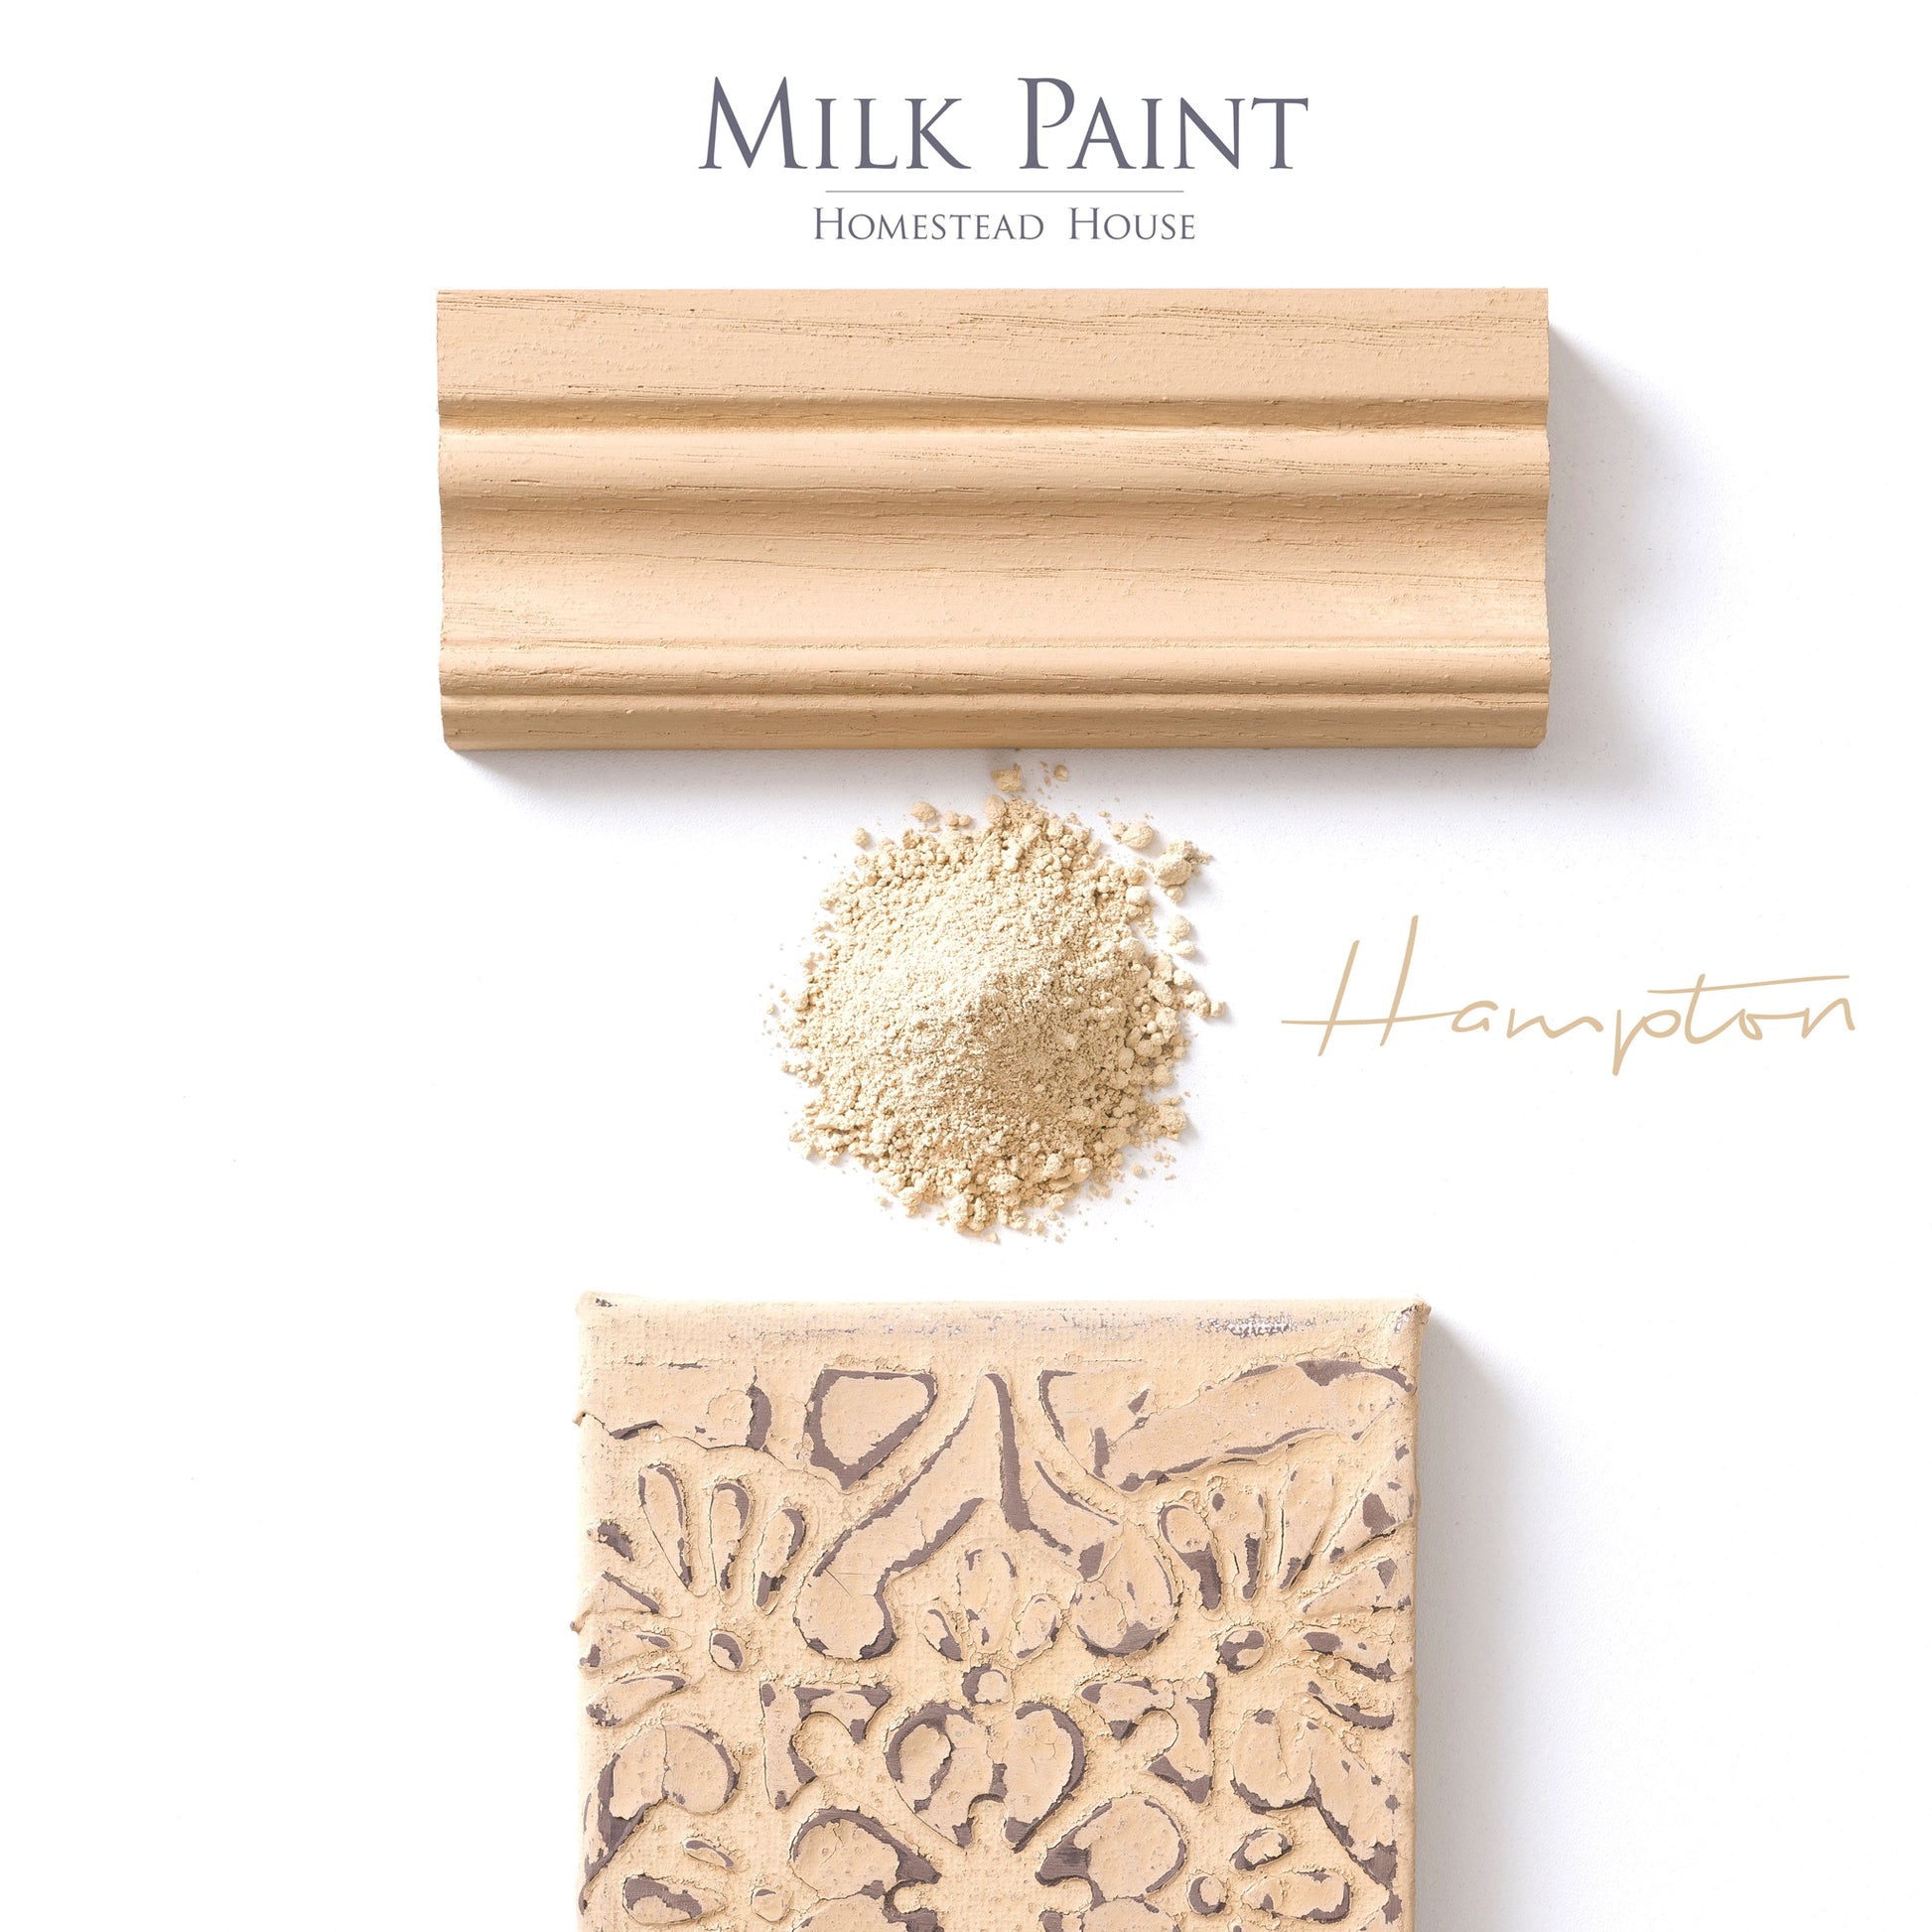 Milk Paint from Homestead House in Hampton, a muted tan with a hint of rust.  |  homesteadhouse.ca